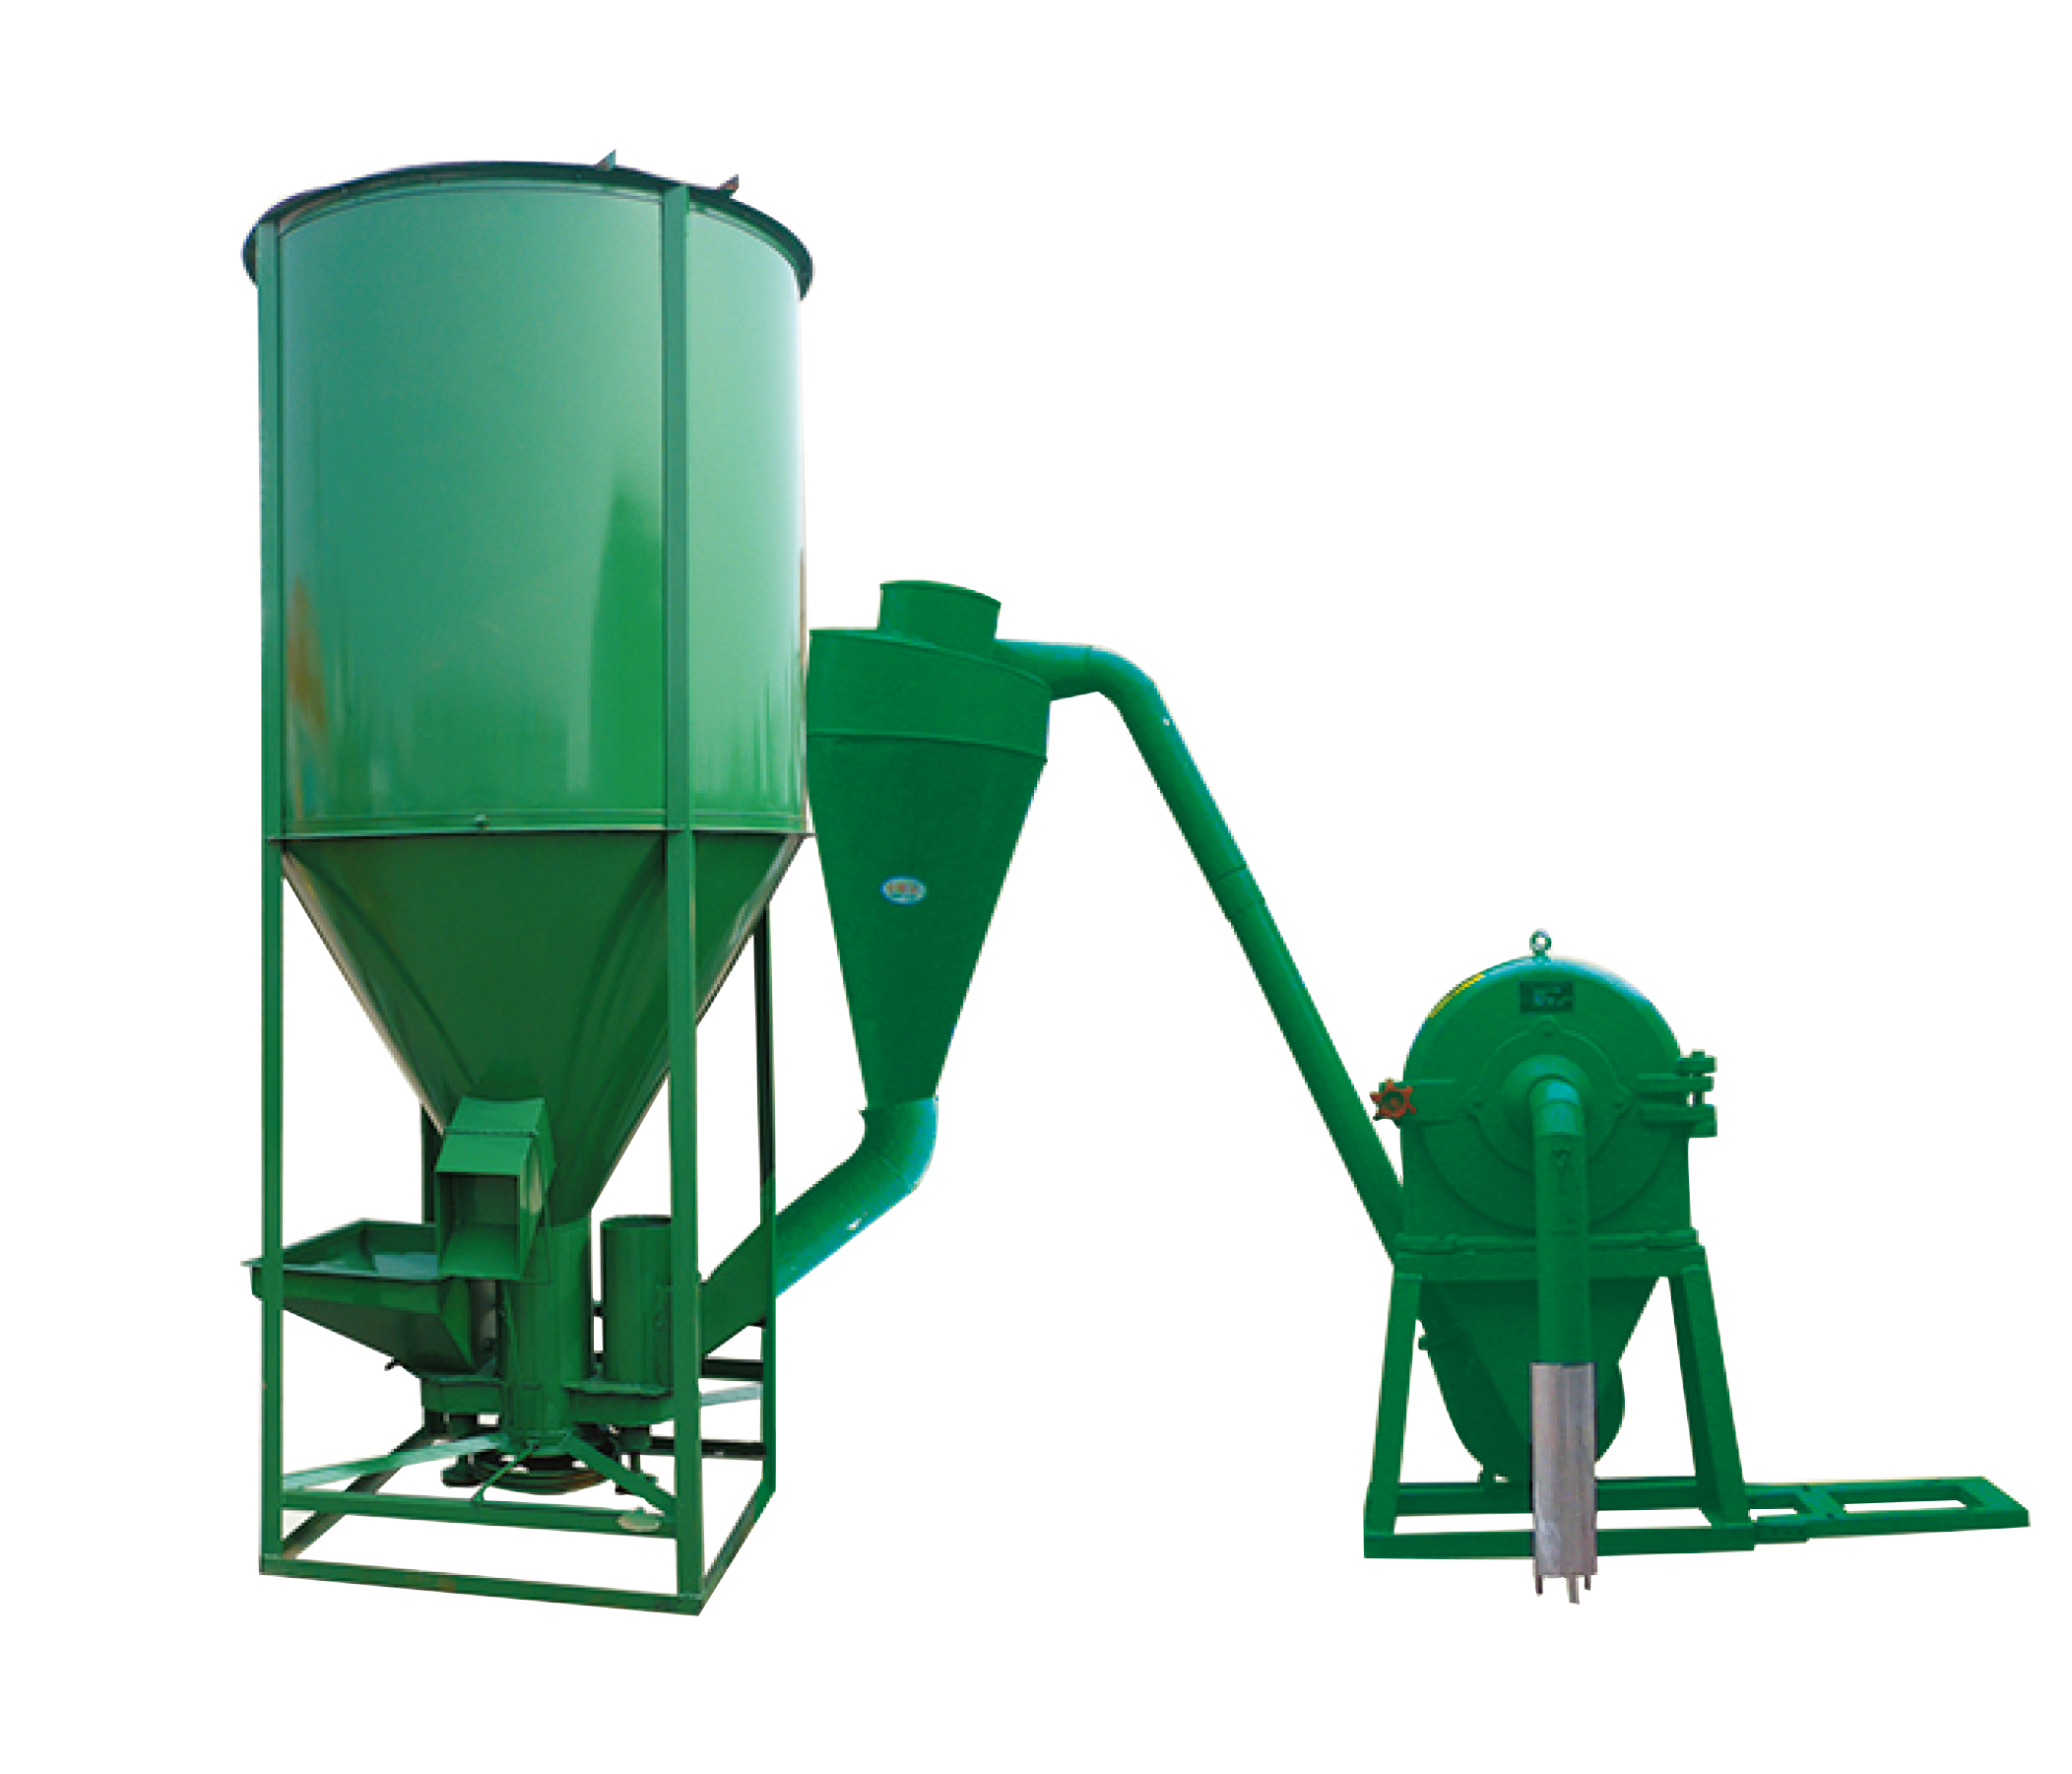 Feed Plant，Feed Grinder & Mixer，Mini Feed Mill System | Prepare Your Own Mash Feed